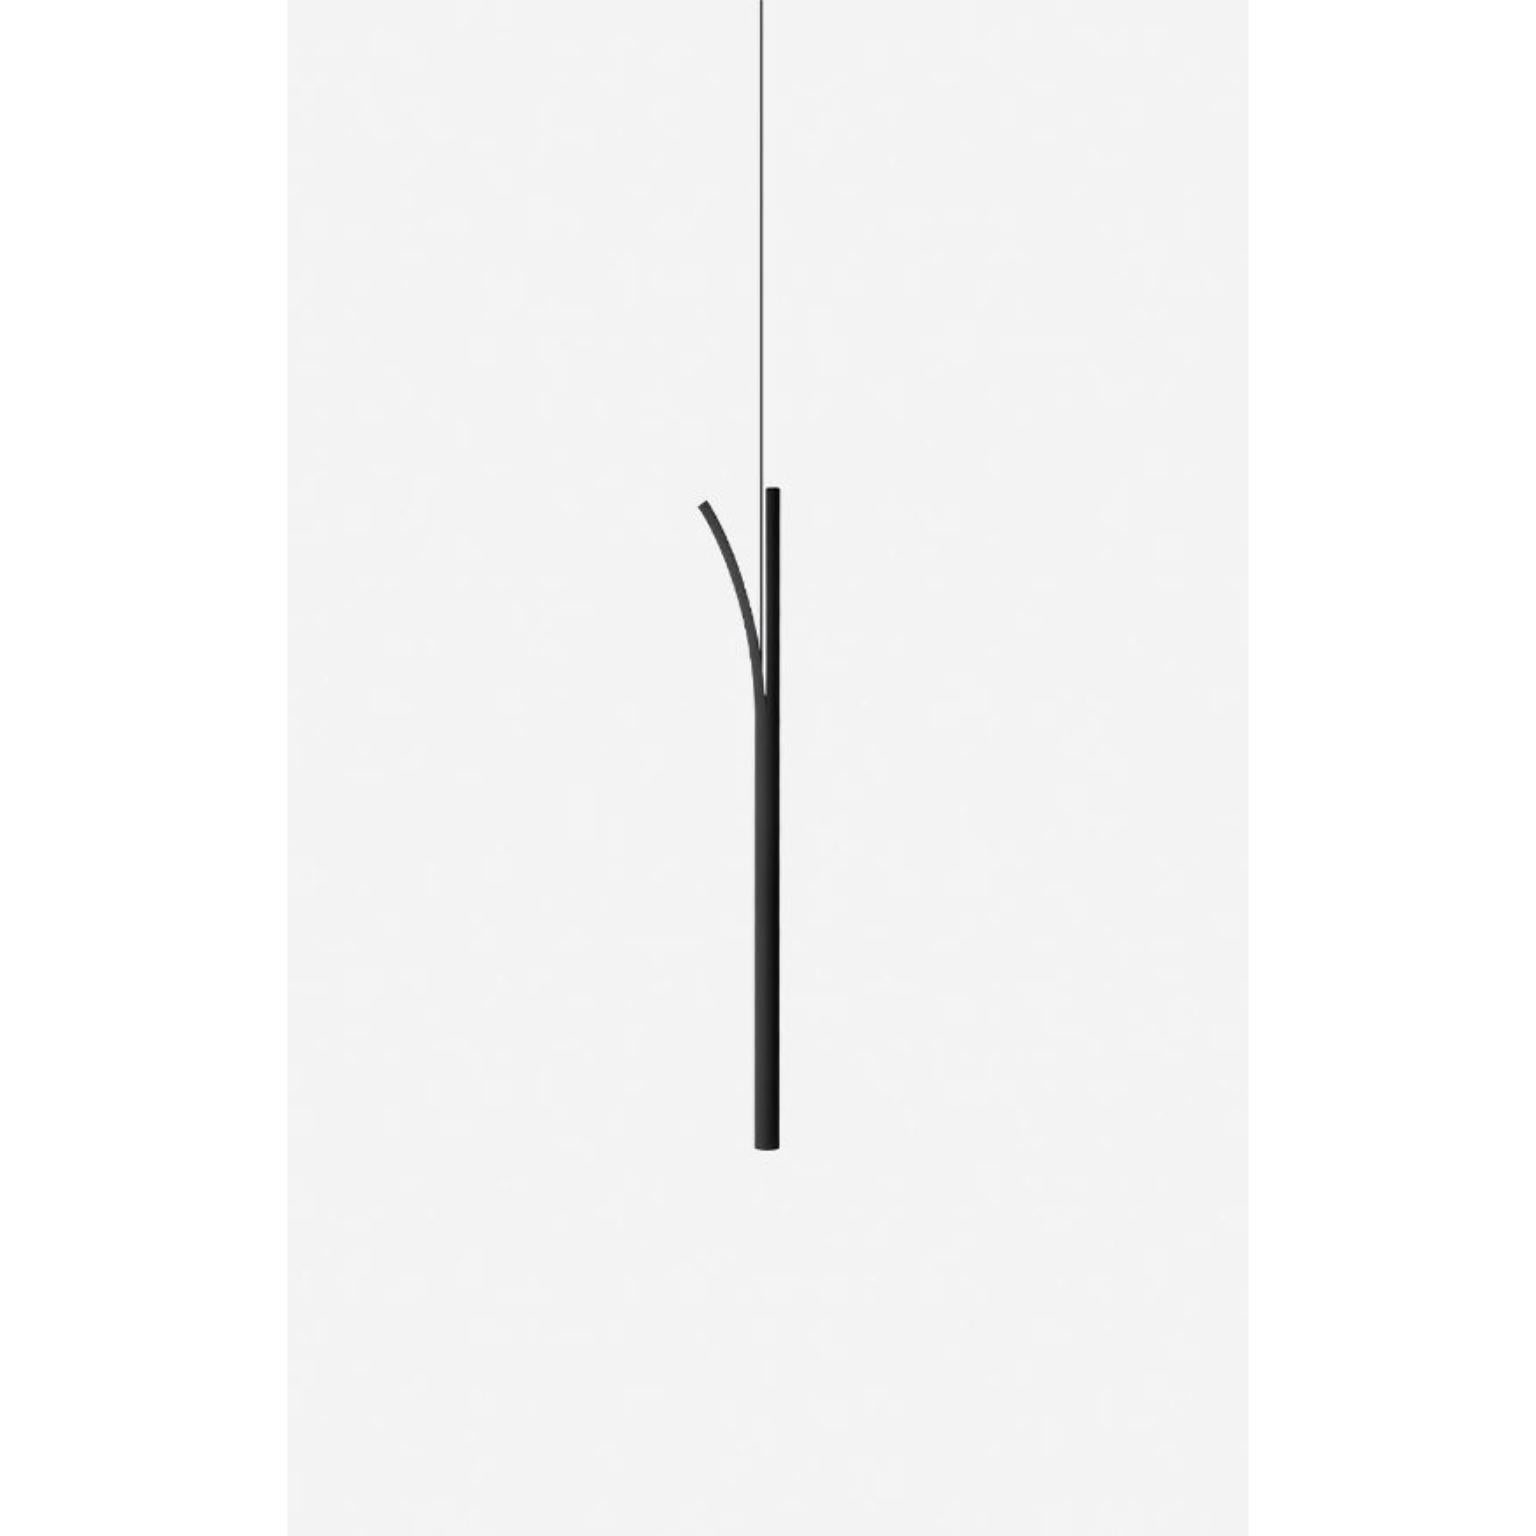 Black Cana Pendant Lamp by Wentz
Dimensions: D 02 x W 07 x H 50 cm
Materials: Aluminum.


WEIGHT: 0,4kg / 0,9 lbs
Colors: Black, White
LIGHT SOURCE: Built-in LED. 118lm. 2700K. 90 CRI.
DIMMING No. Consult-us for dimming systems.
VOLTAGE: